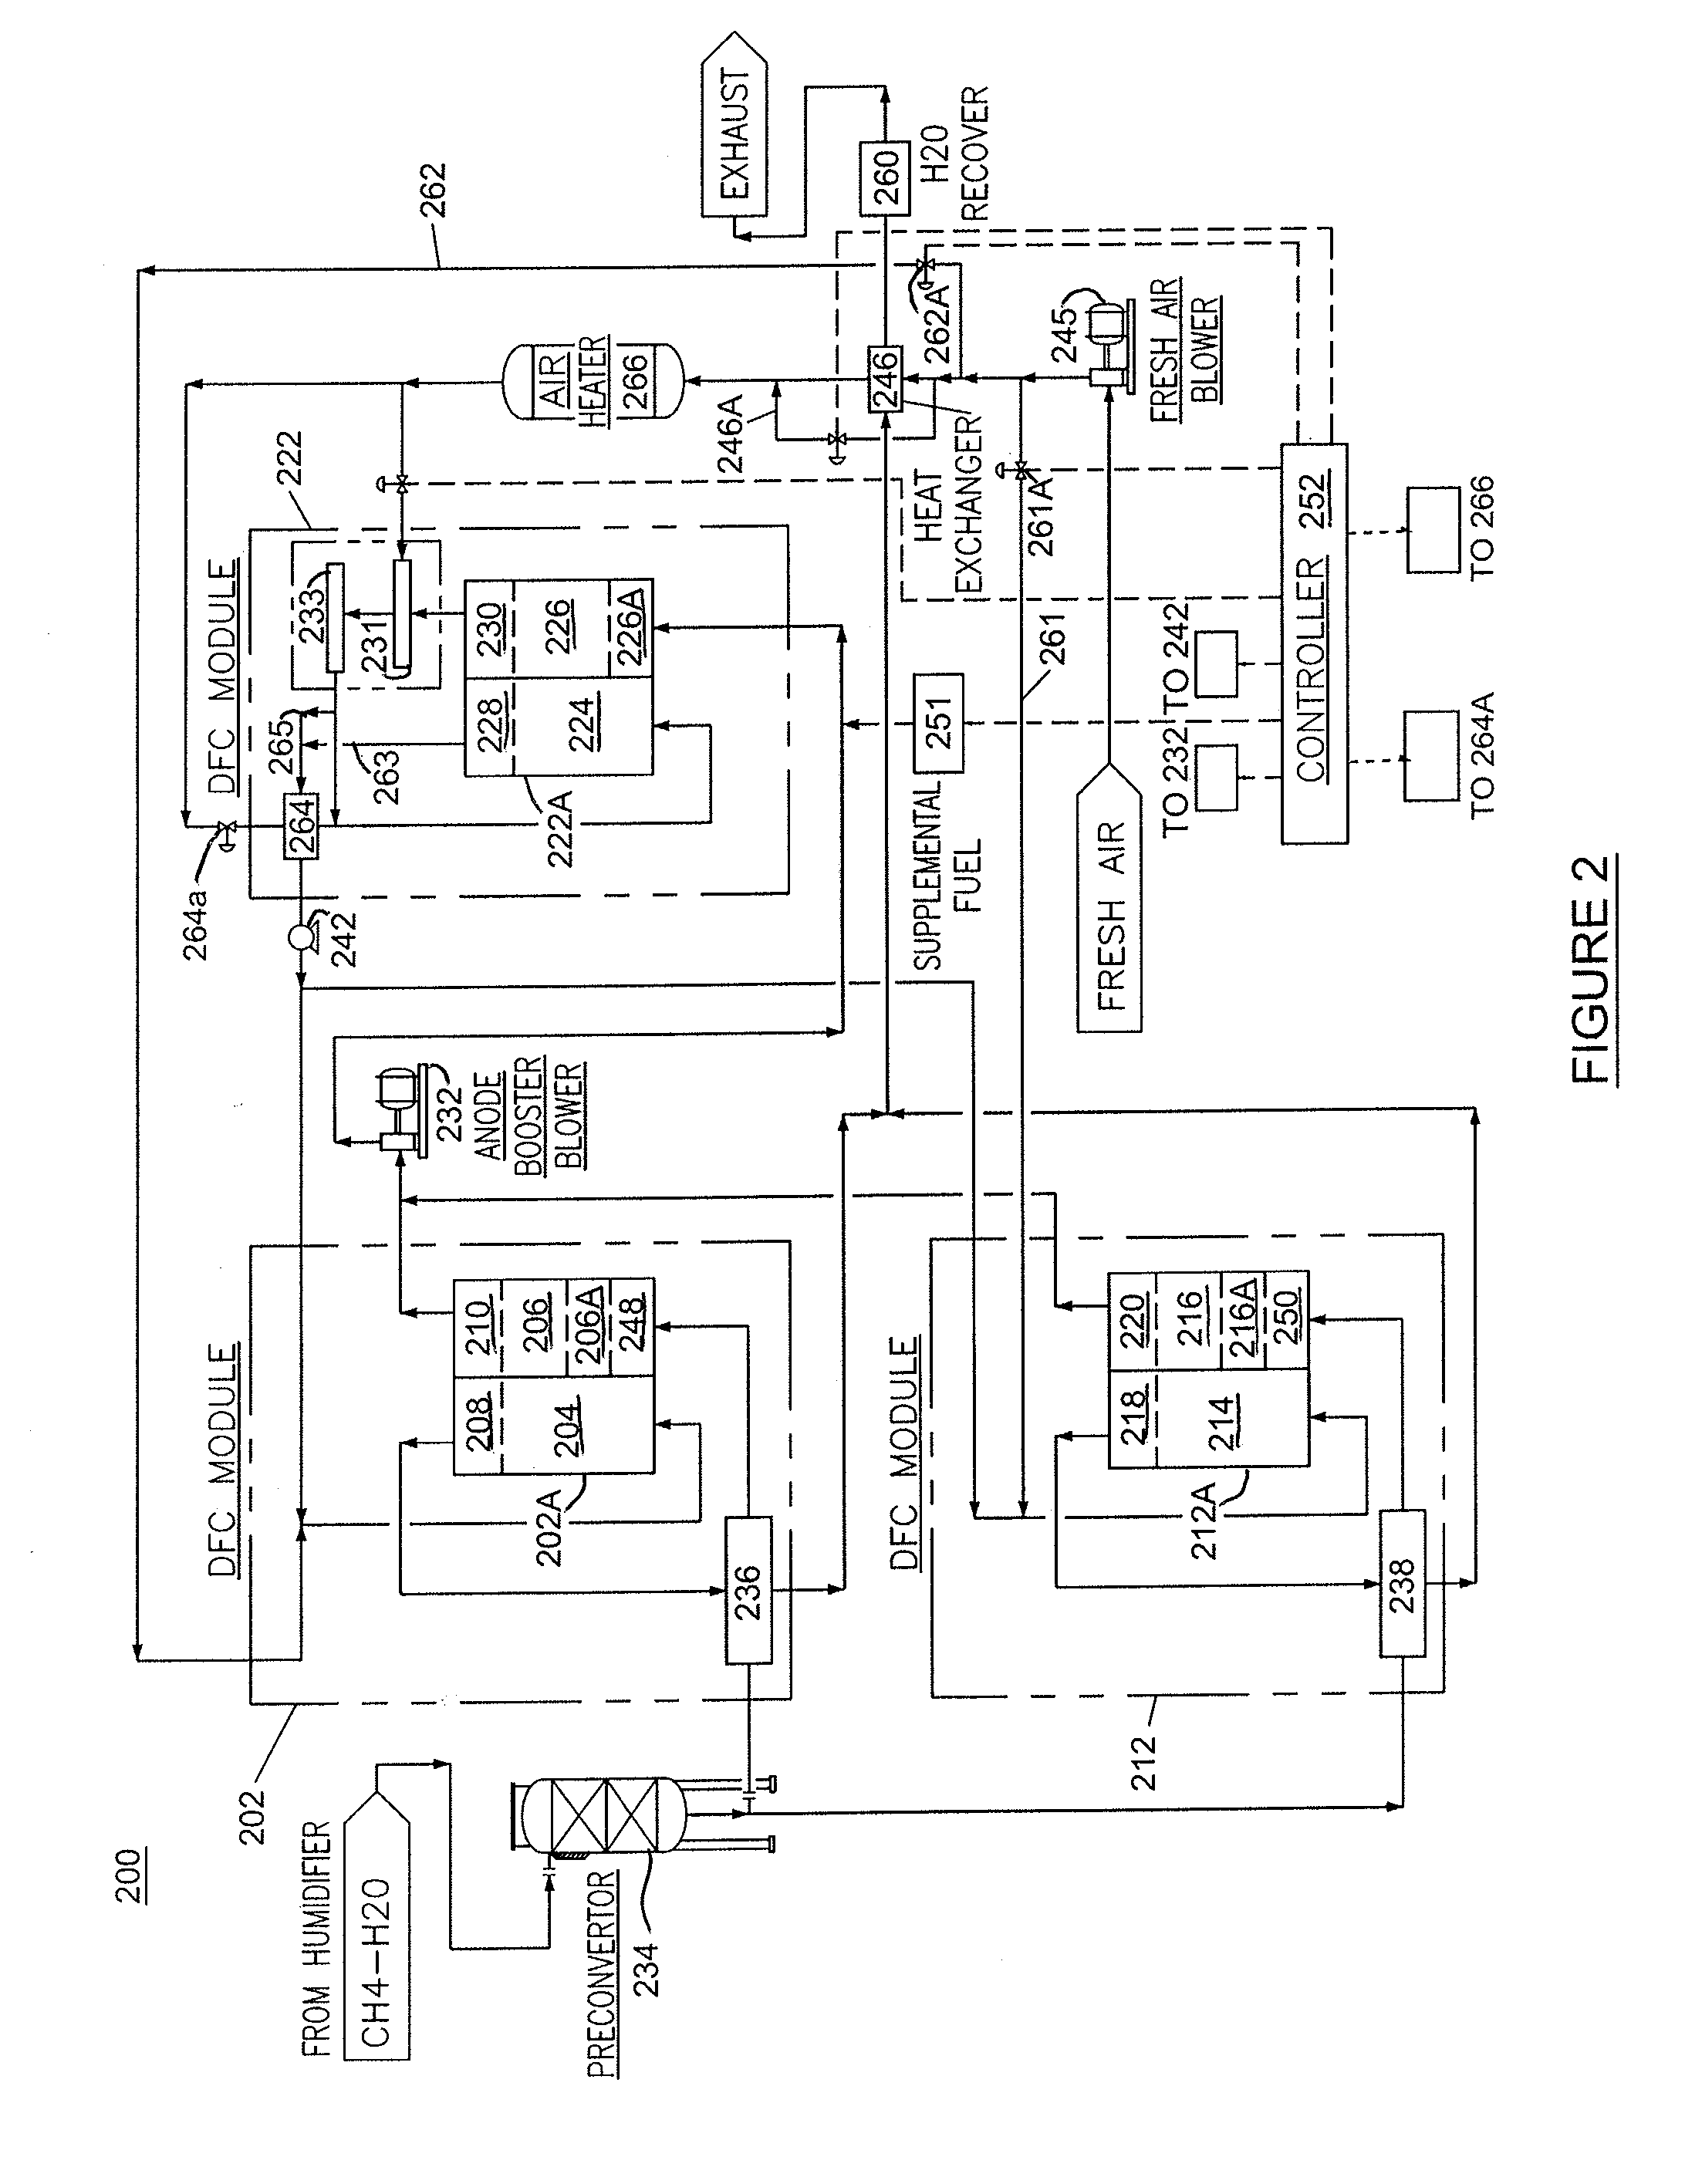 High-efficiency molten carbonate fuel cell system and method